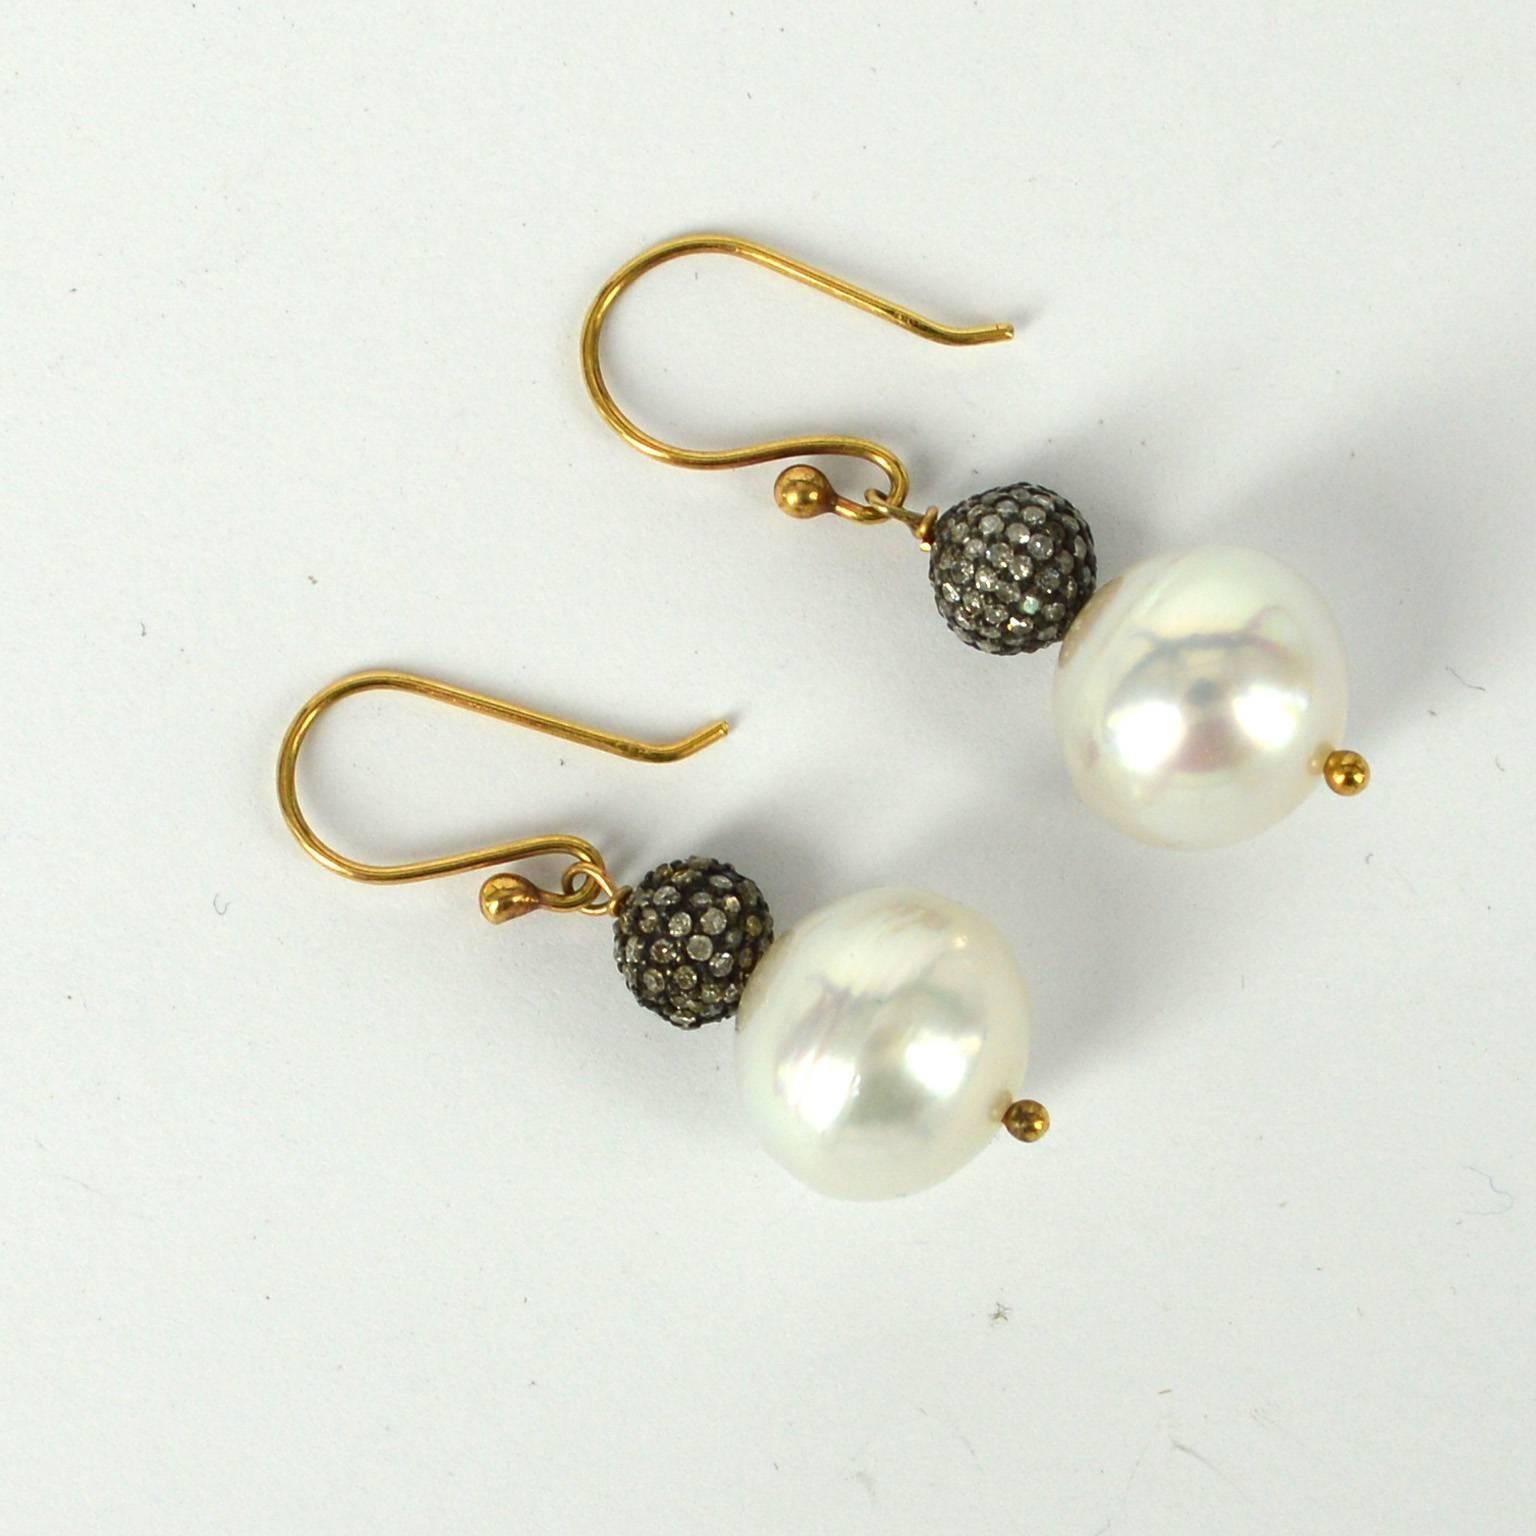 12mm High luster South Sea Pearls with 7mm Pave set Diamond Silver beads.
Sheppard and post are 9ct Yellow gold.
Earring drop 34mm.